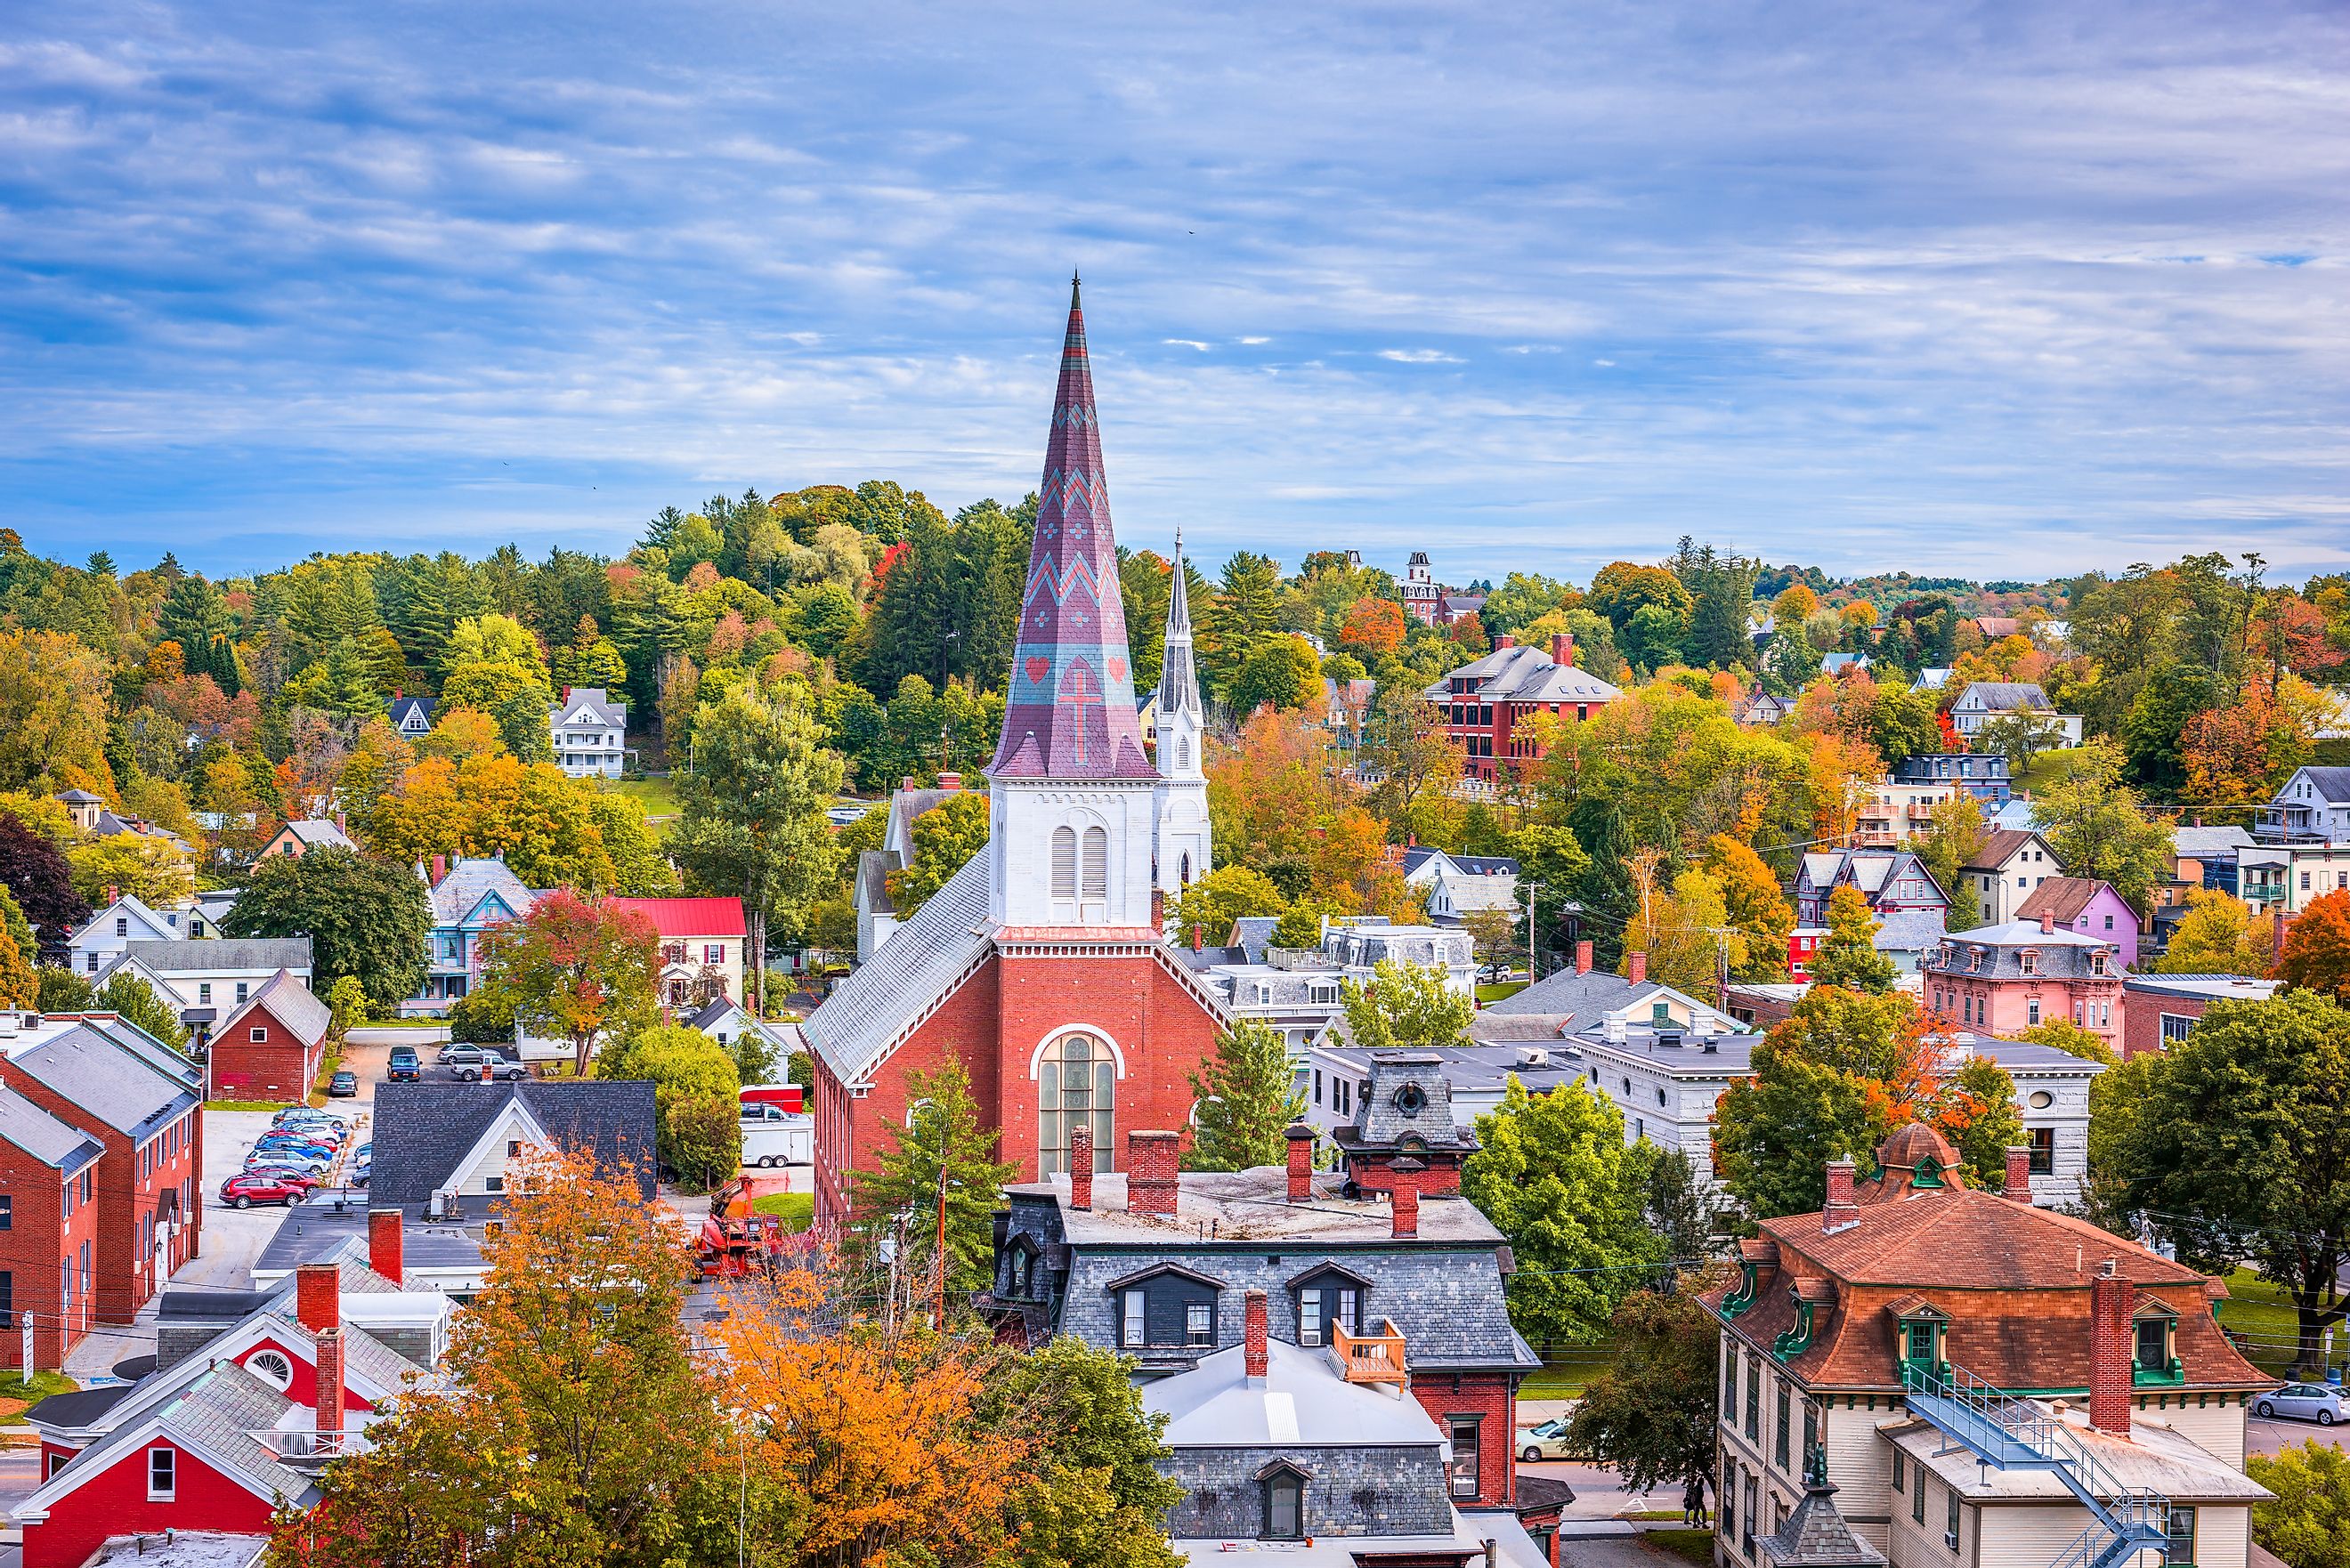 The Town Skyline of Montpelier in Vermont